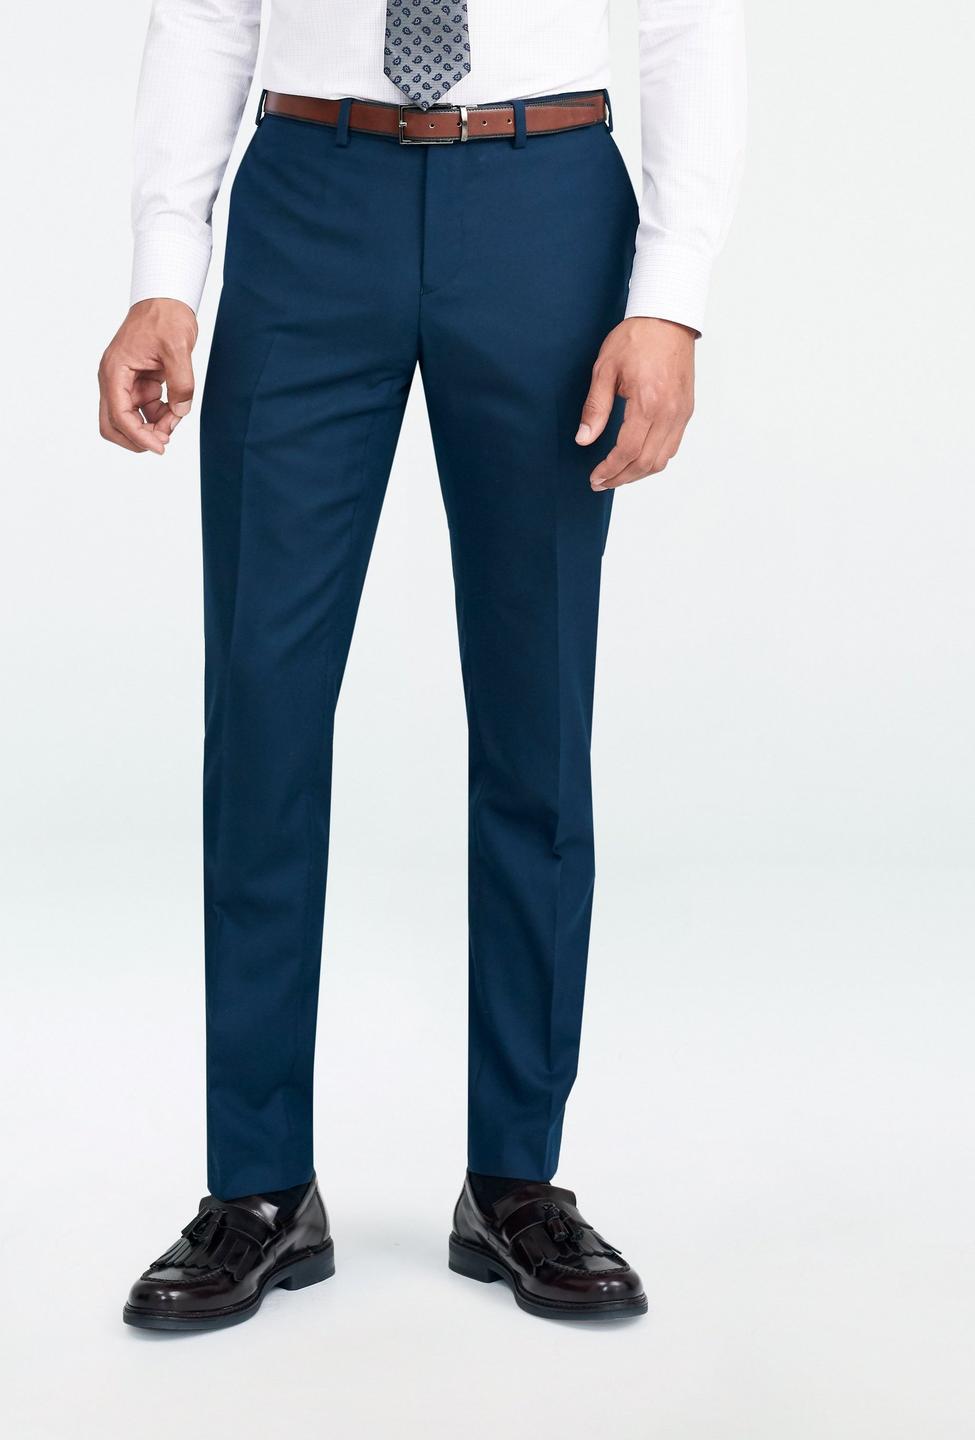 Teal pants - Hayward Solid Design from Luxury Indochino Collection